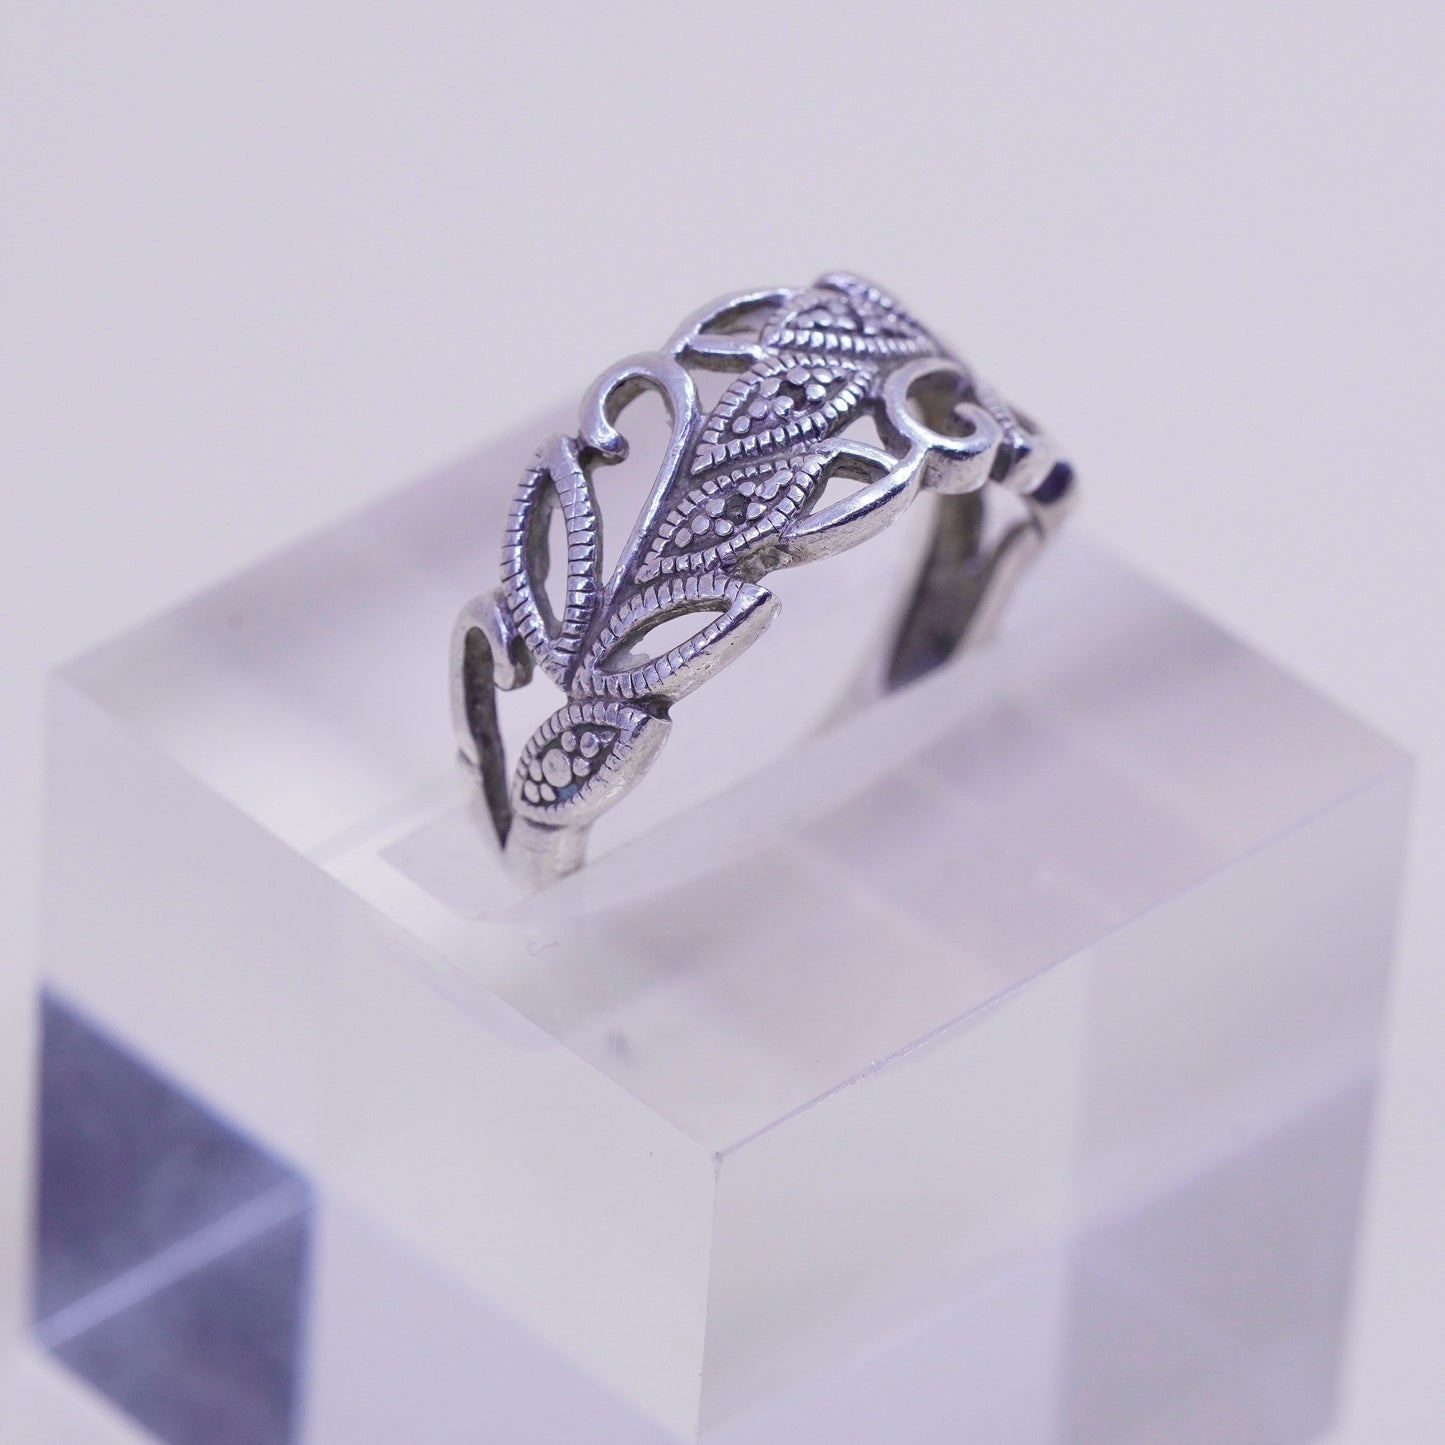 Size 7.25, vintage Sterling silver ring, 925 leaves band with real diamond